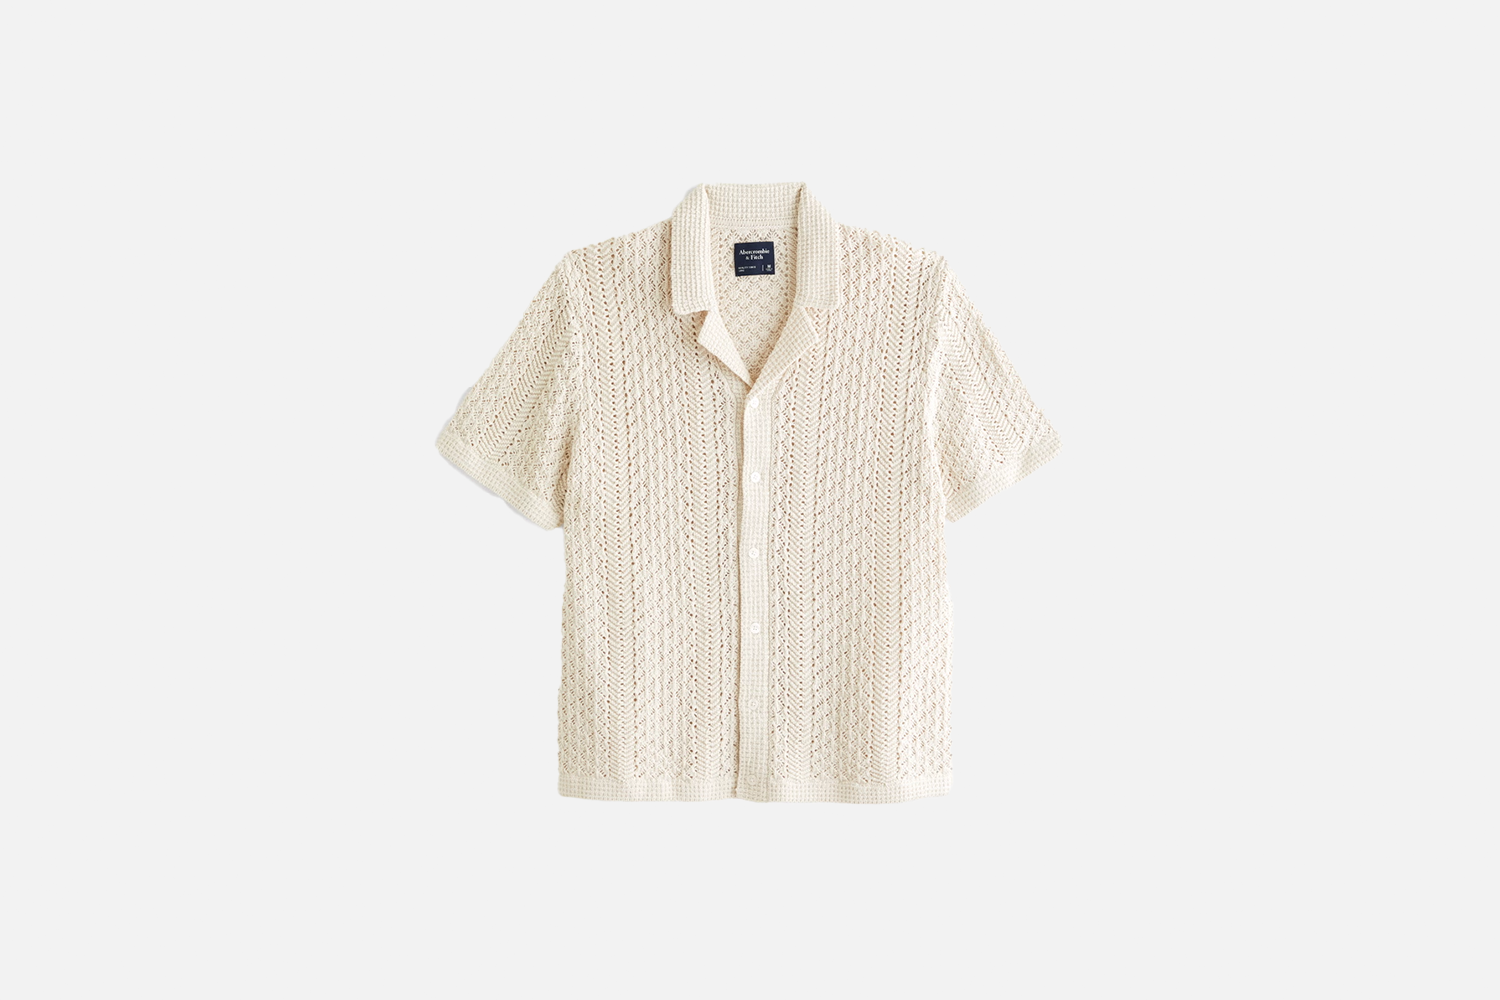 Abercrombie & Fitch Crochet-Style Stitch Button-Through Sweater Polo